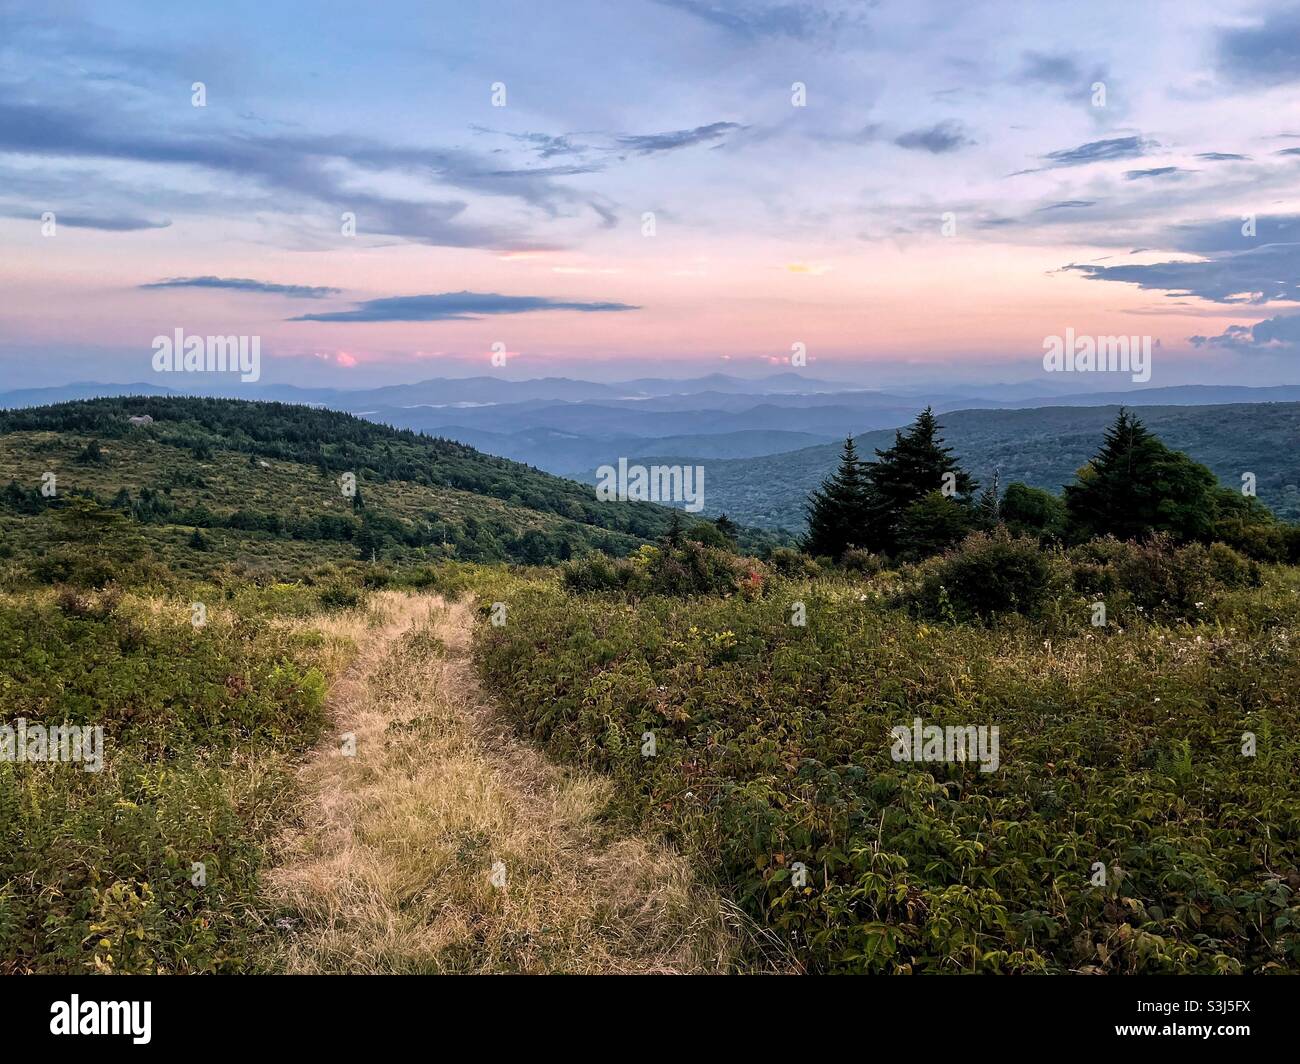 A trail winds up the steep grasslands above Grayson highlands state park in Virginia at sunset. Stock Photo